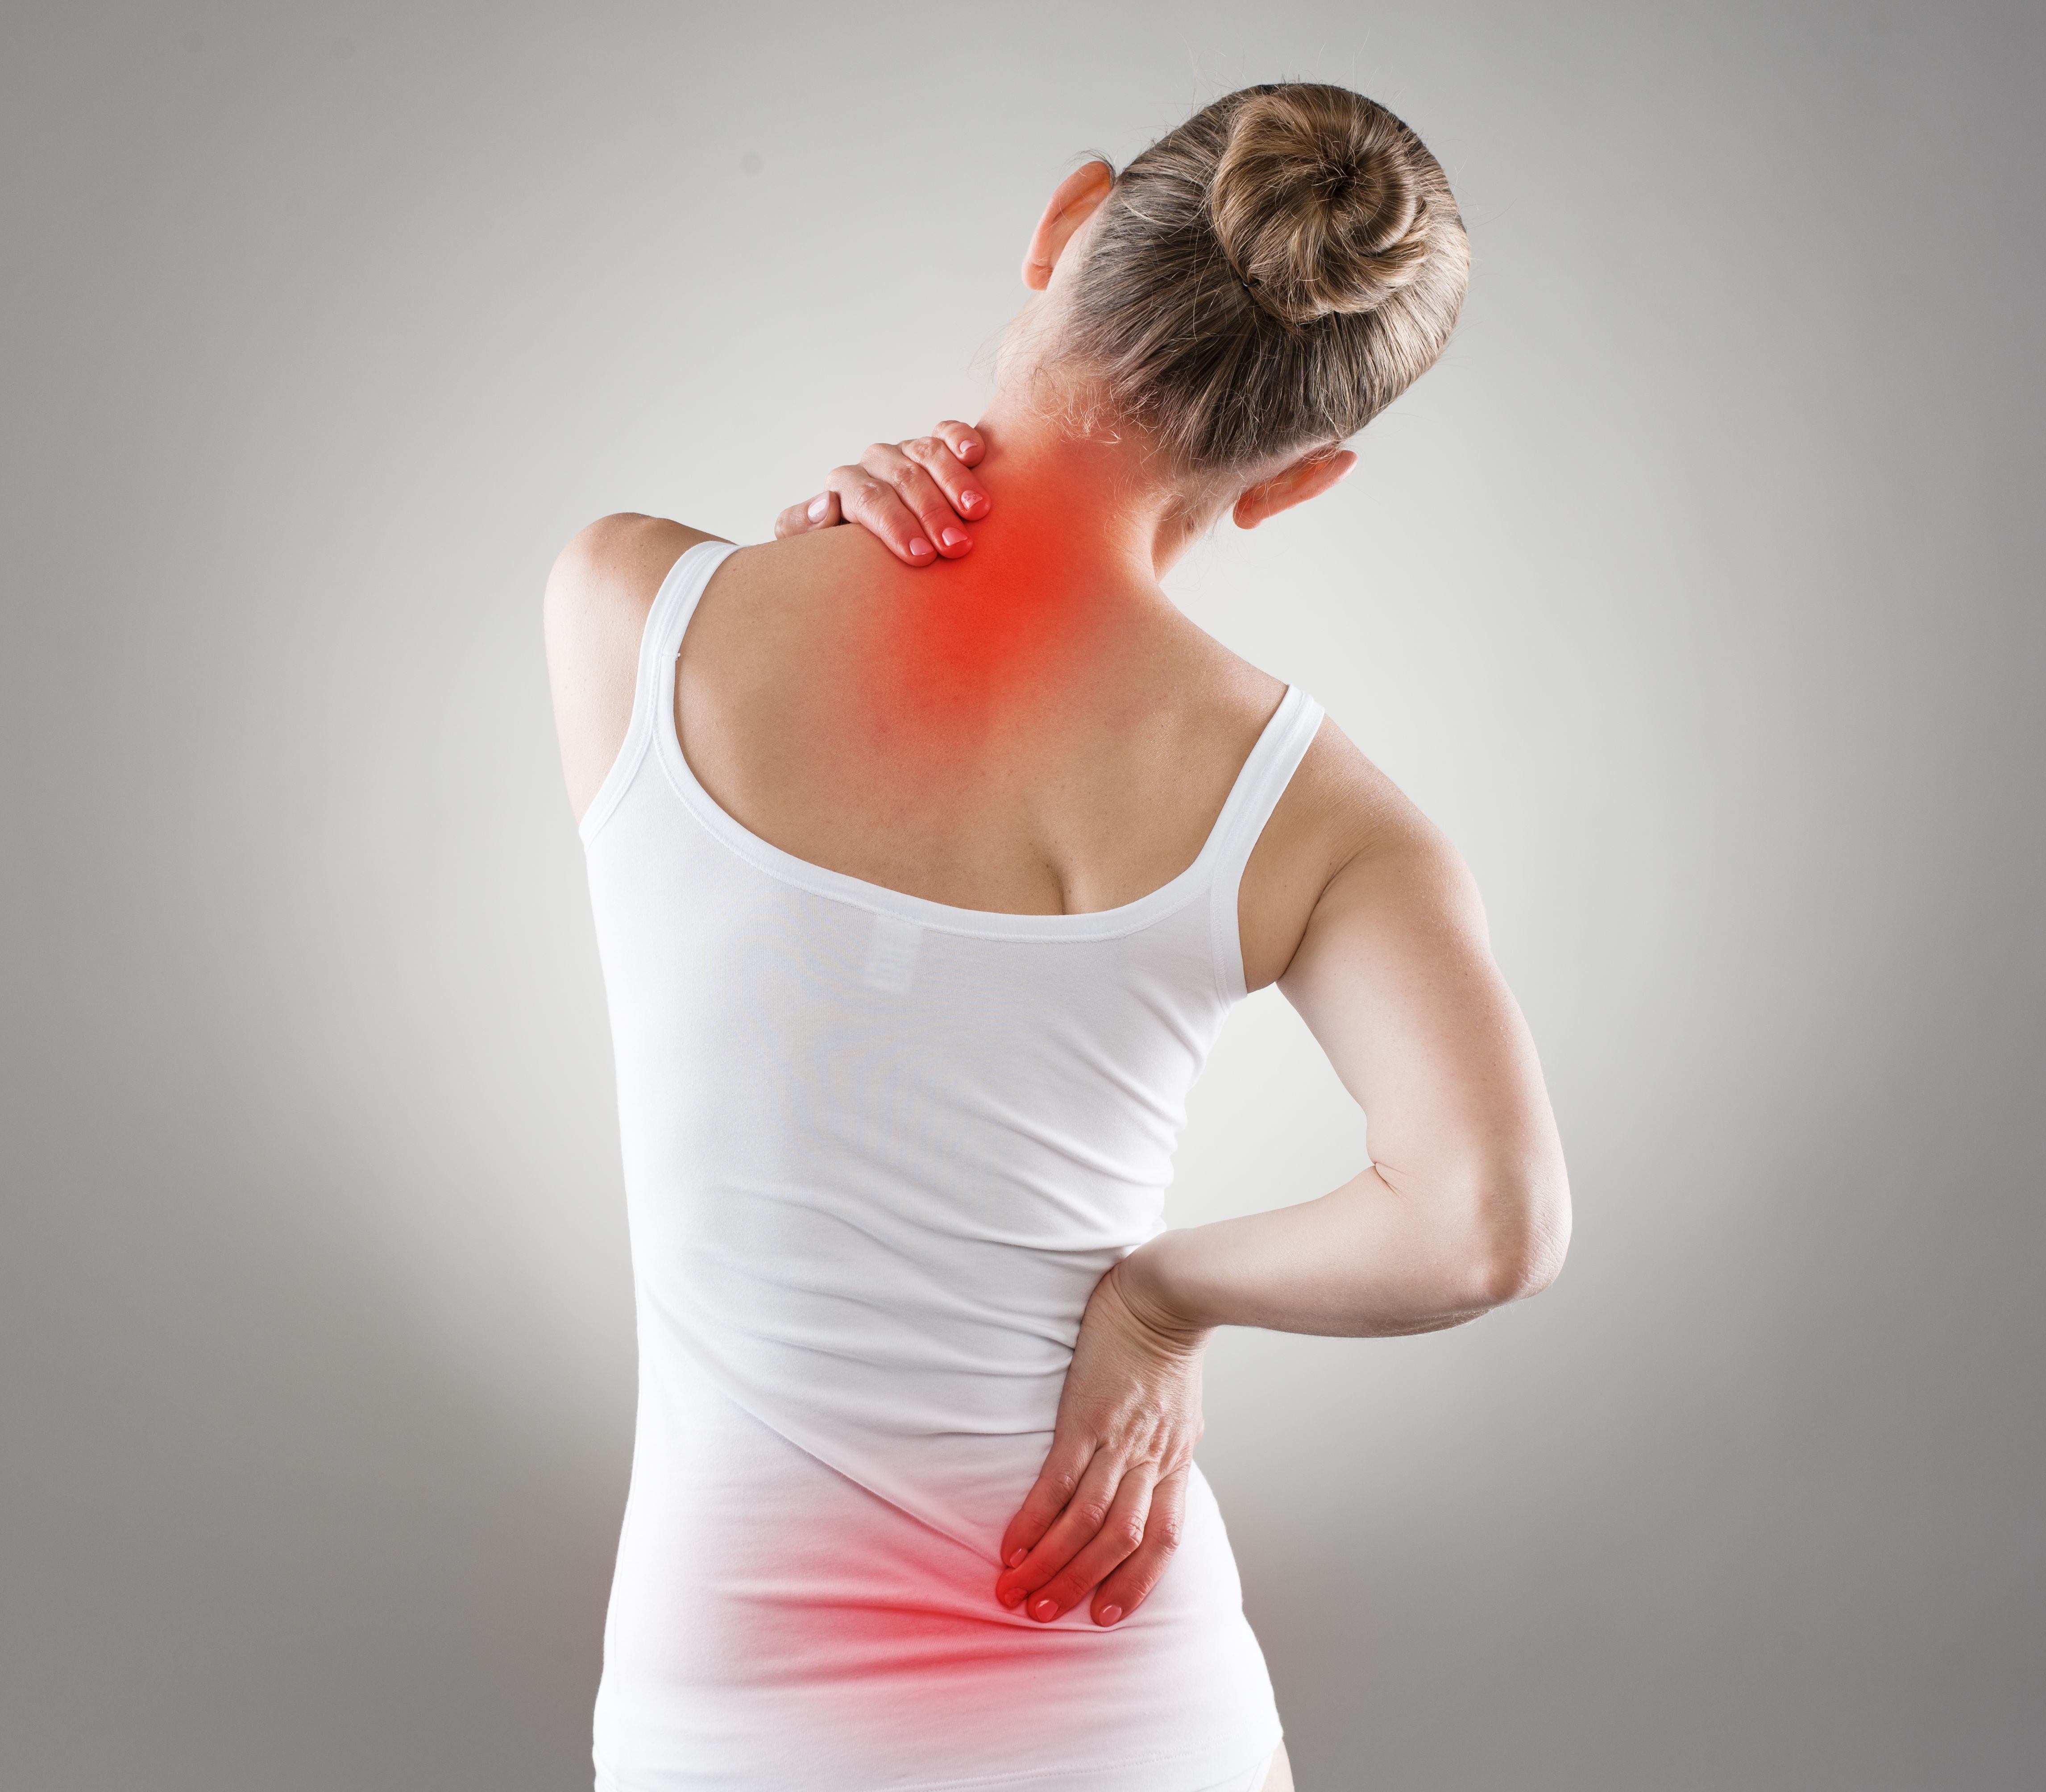 MedX Strengthening: Targeted Relief for Low Back and Neck Pain